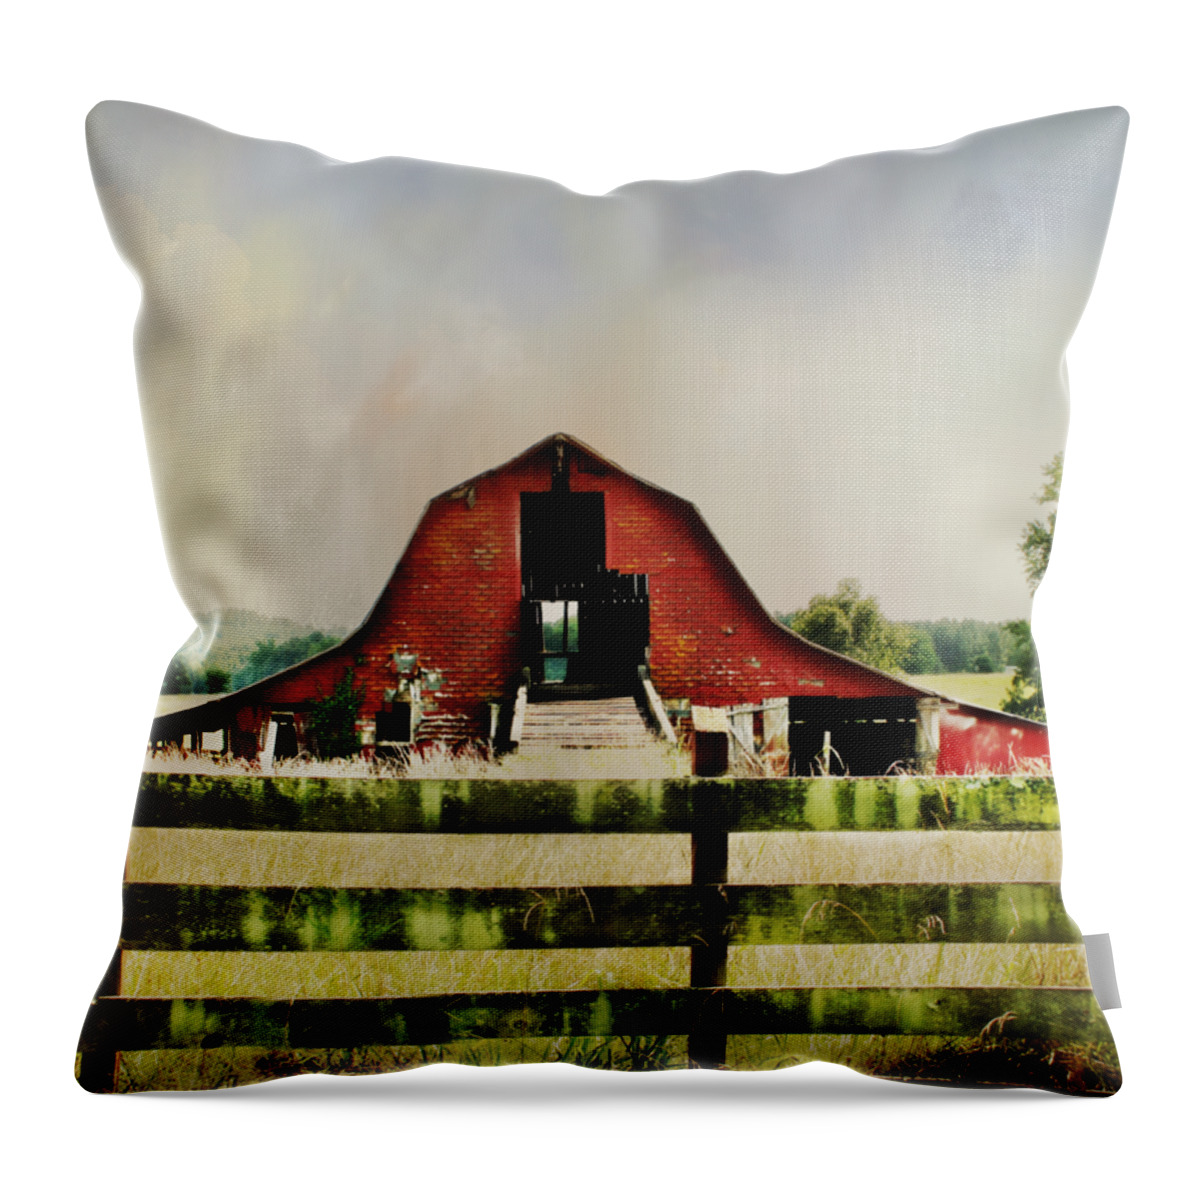 Top Selling Art Throw Pillow featuring the photograph Crawford Rd by Julie Hamilton